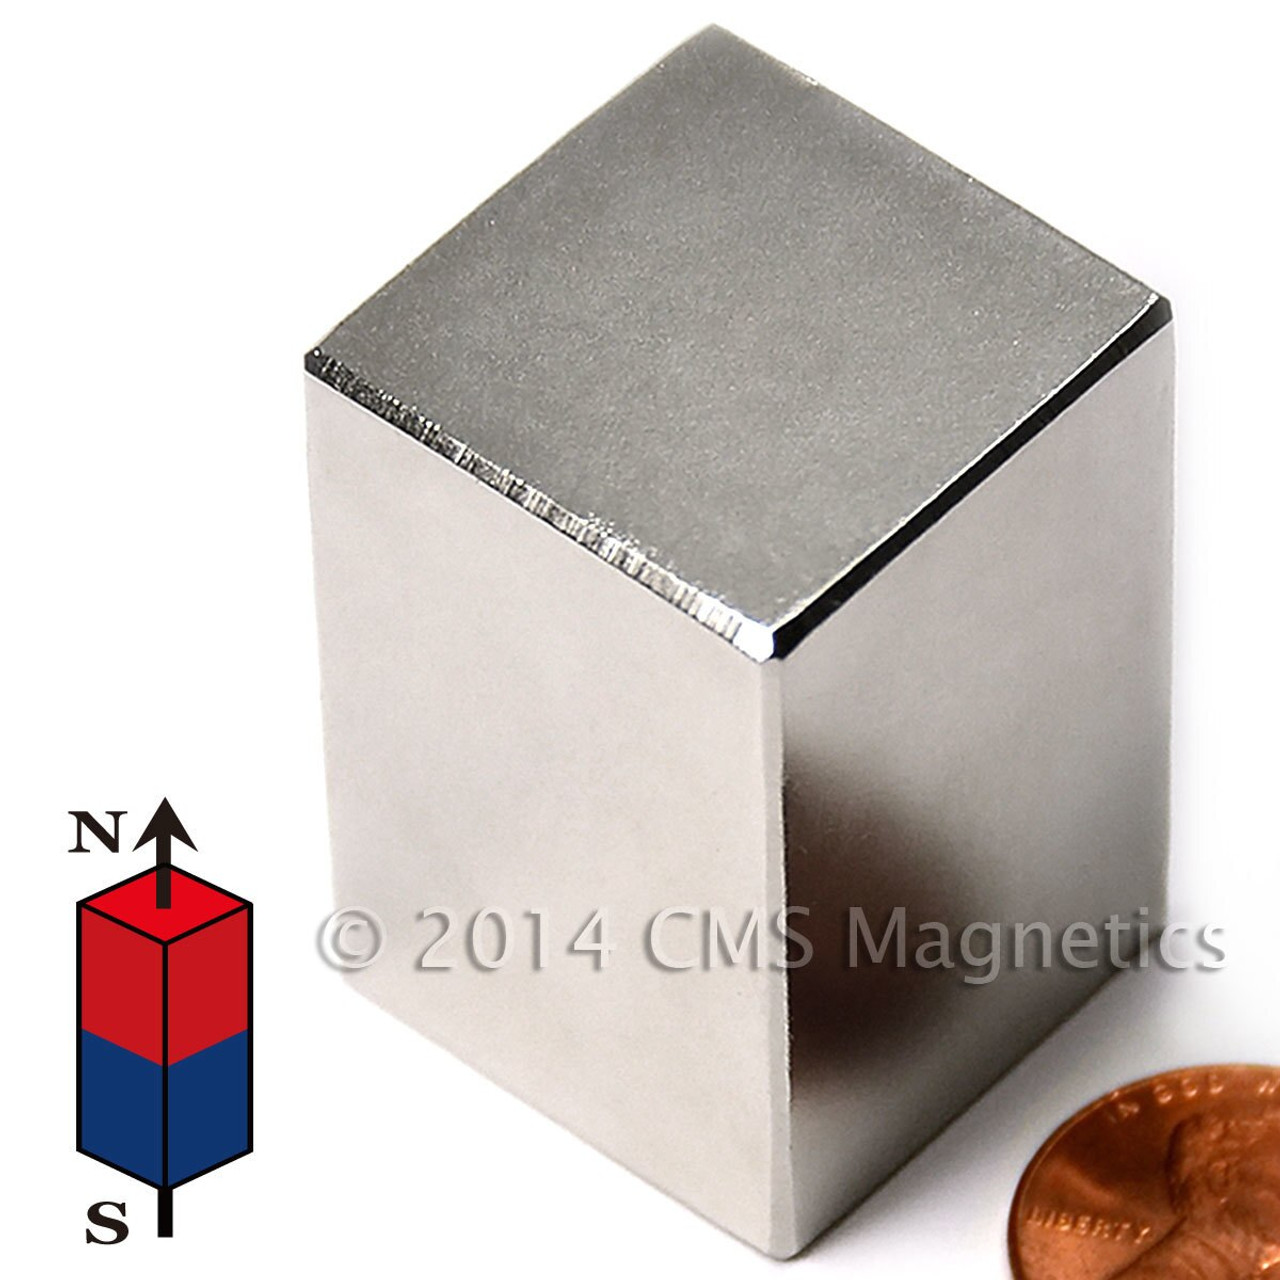 Dia 42x3 mm Steel Strikers w/ Countersunk Hole for Disc Magnets or MCHN Cup Magnets, Nickel Coated (1.65"x0.12")